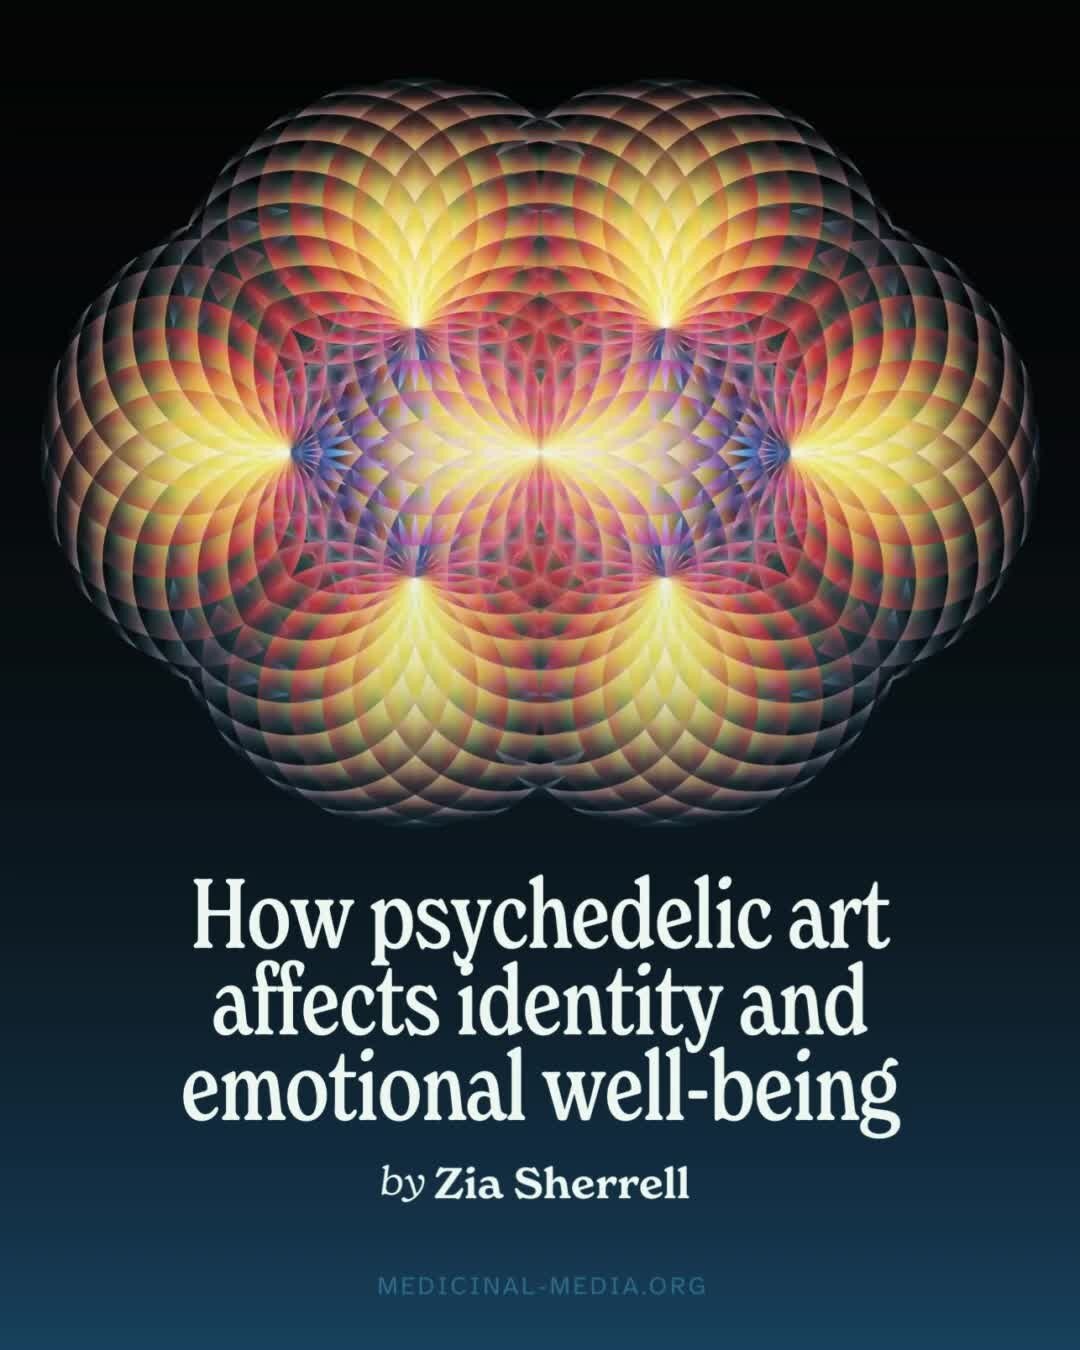 Psychedelic therapies are on the rise as a way to help treat multiple mental health conditions. Art plays a key role in the overall therapeutic experience and its effects. In this story by @ziahealthwriter, learn more about why visual art shows up in